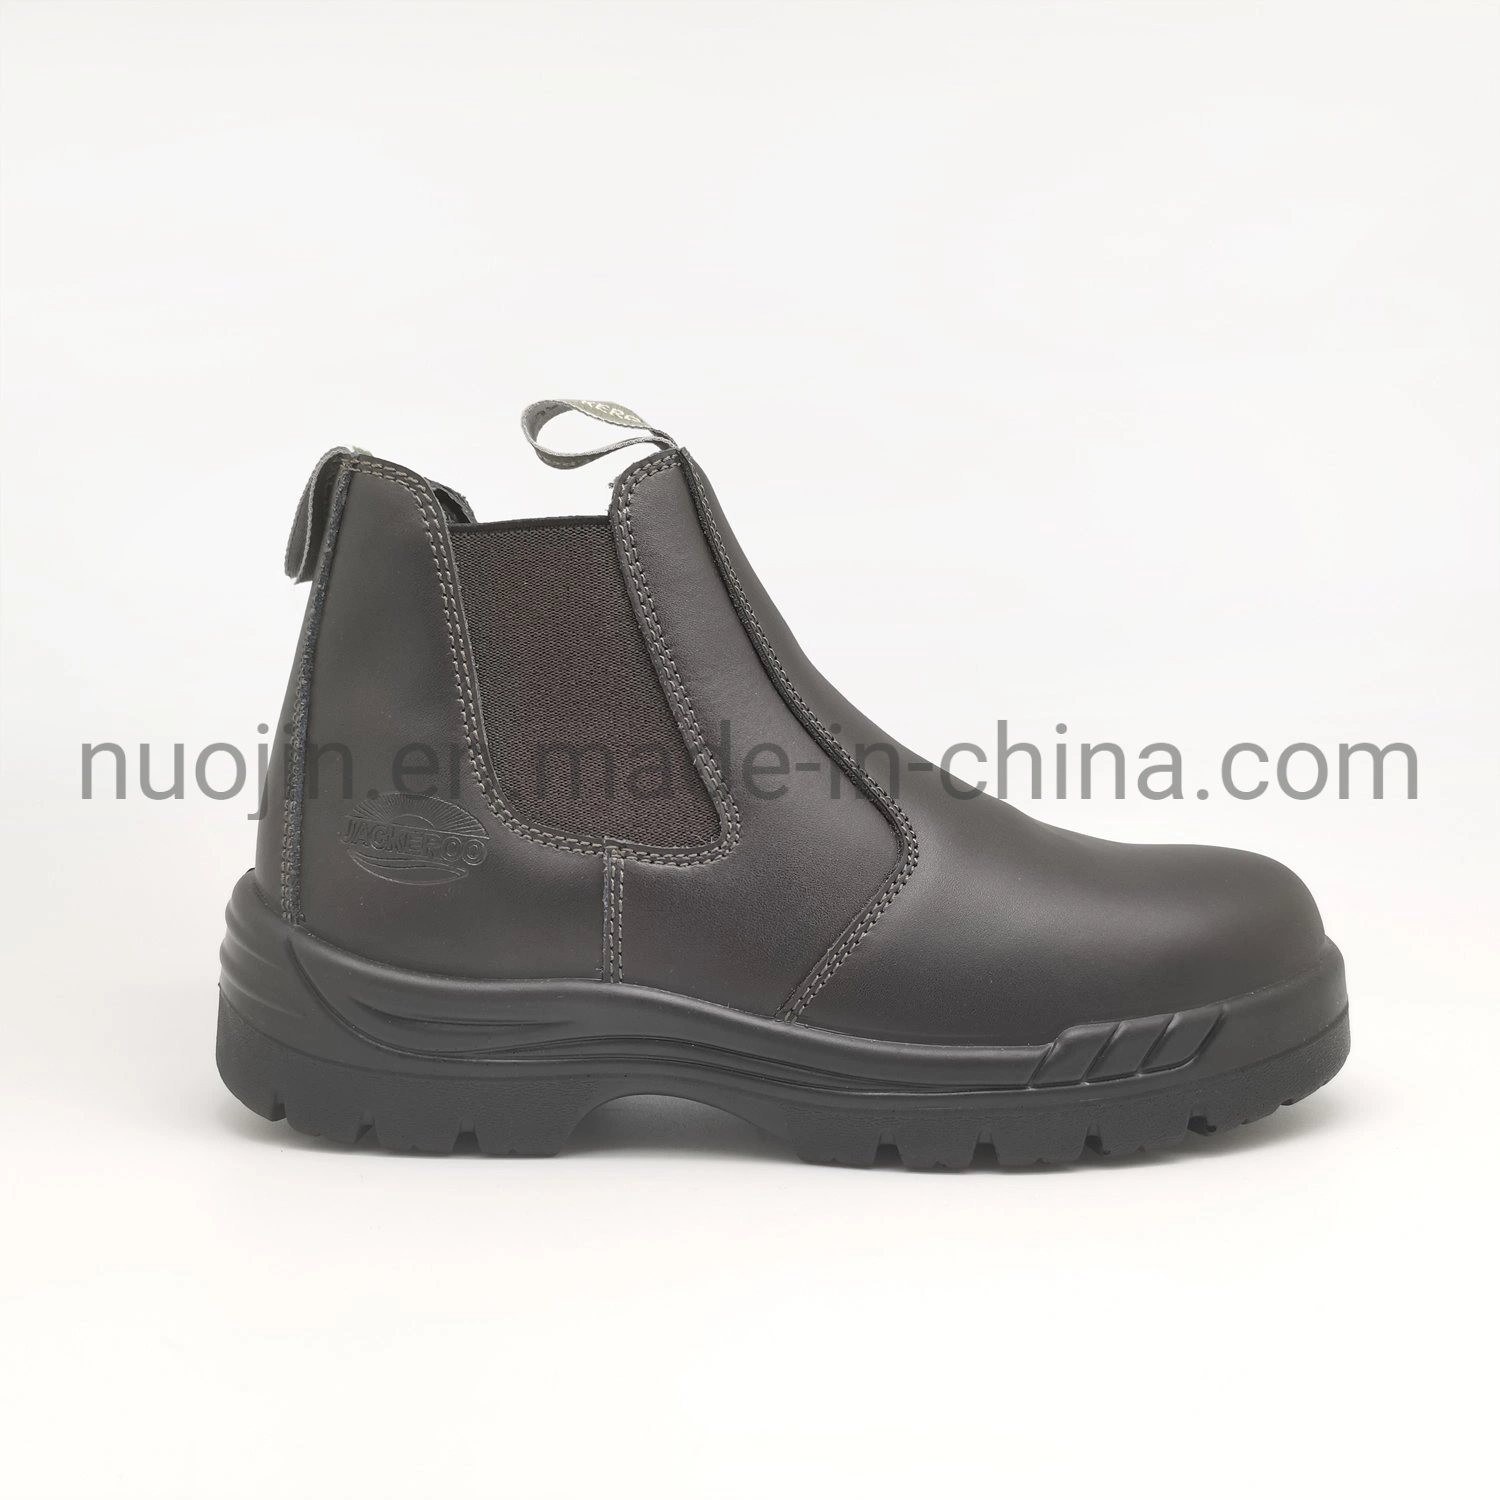 Men's Safety Boots Steel Toe Breathable Non-Slip for Work Safety Shoes